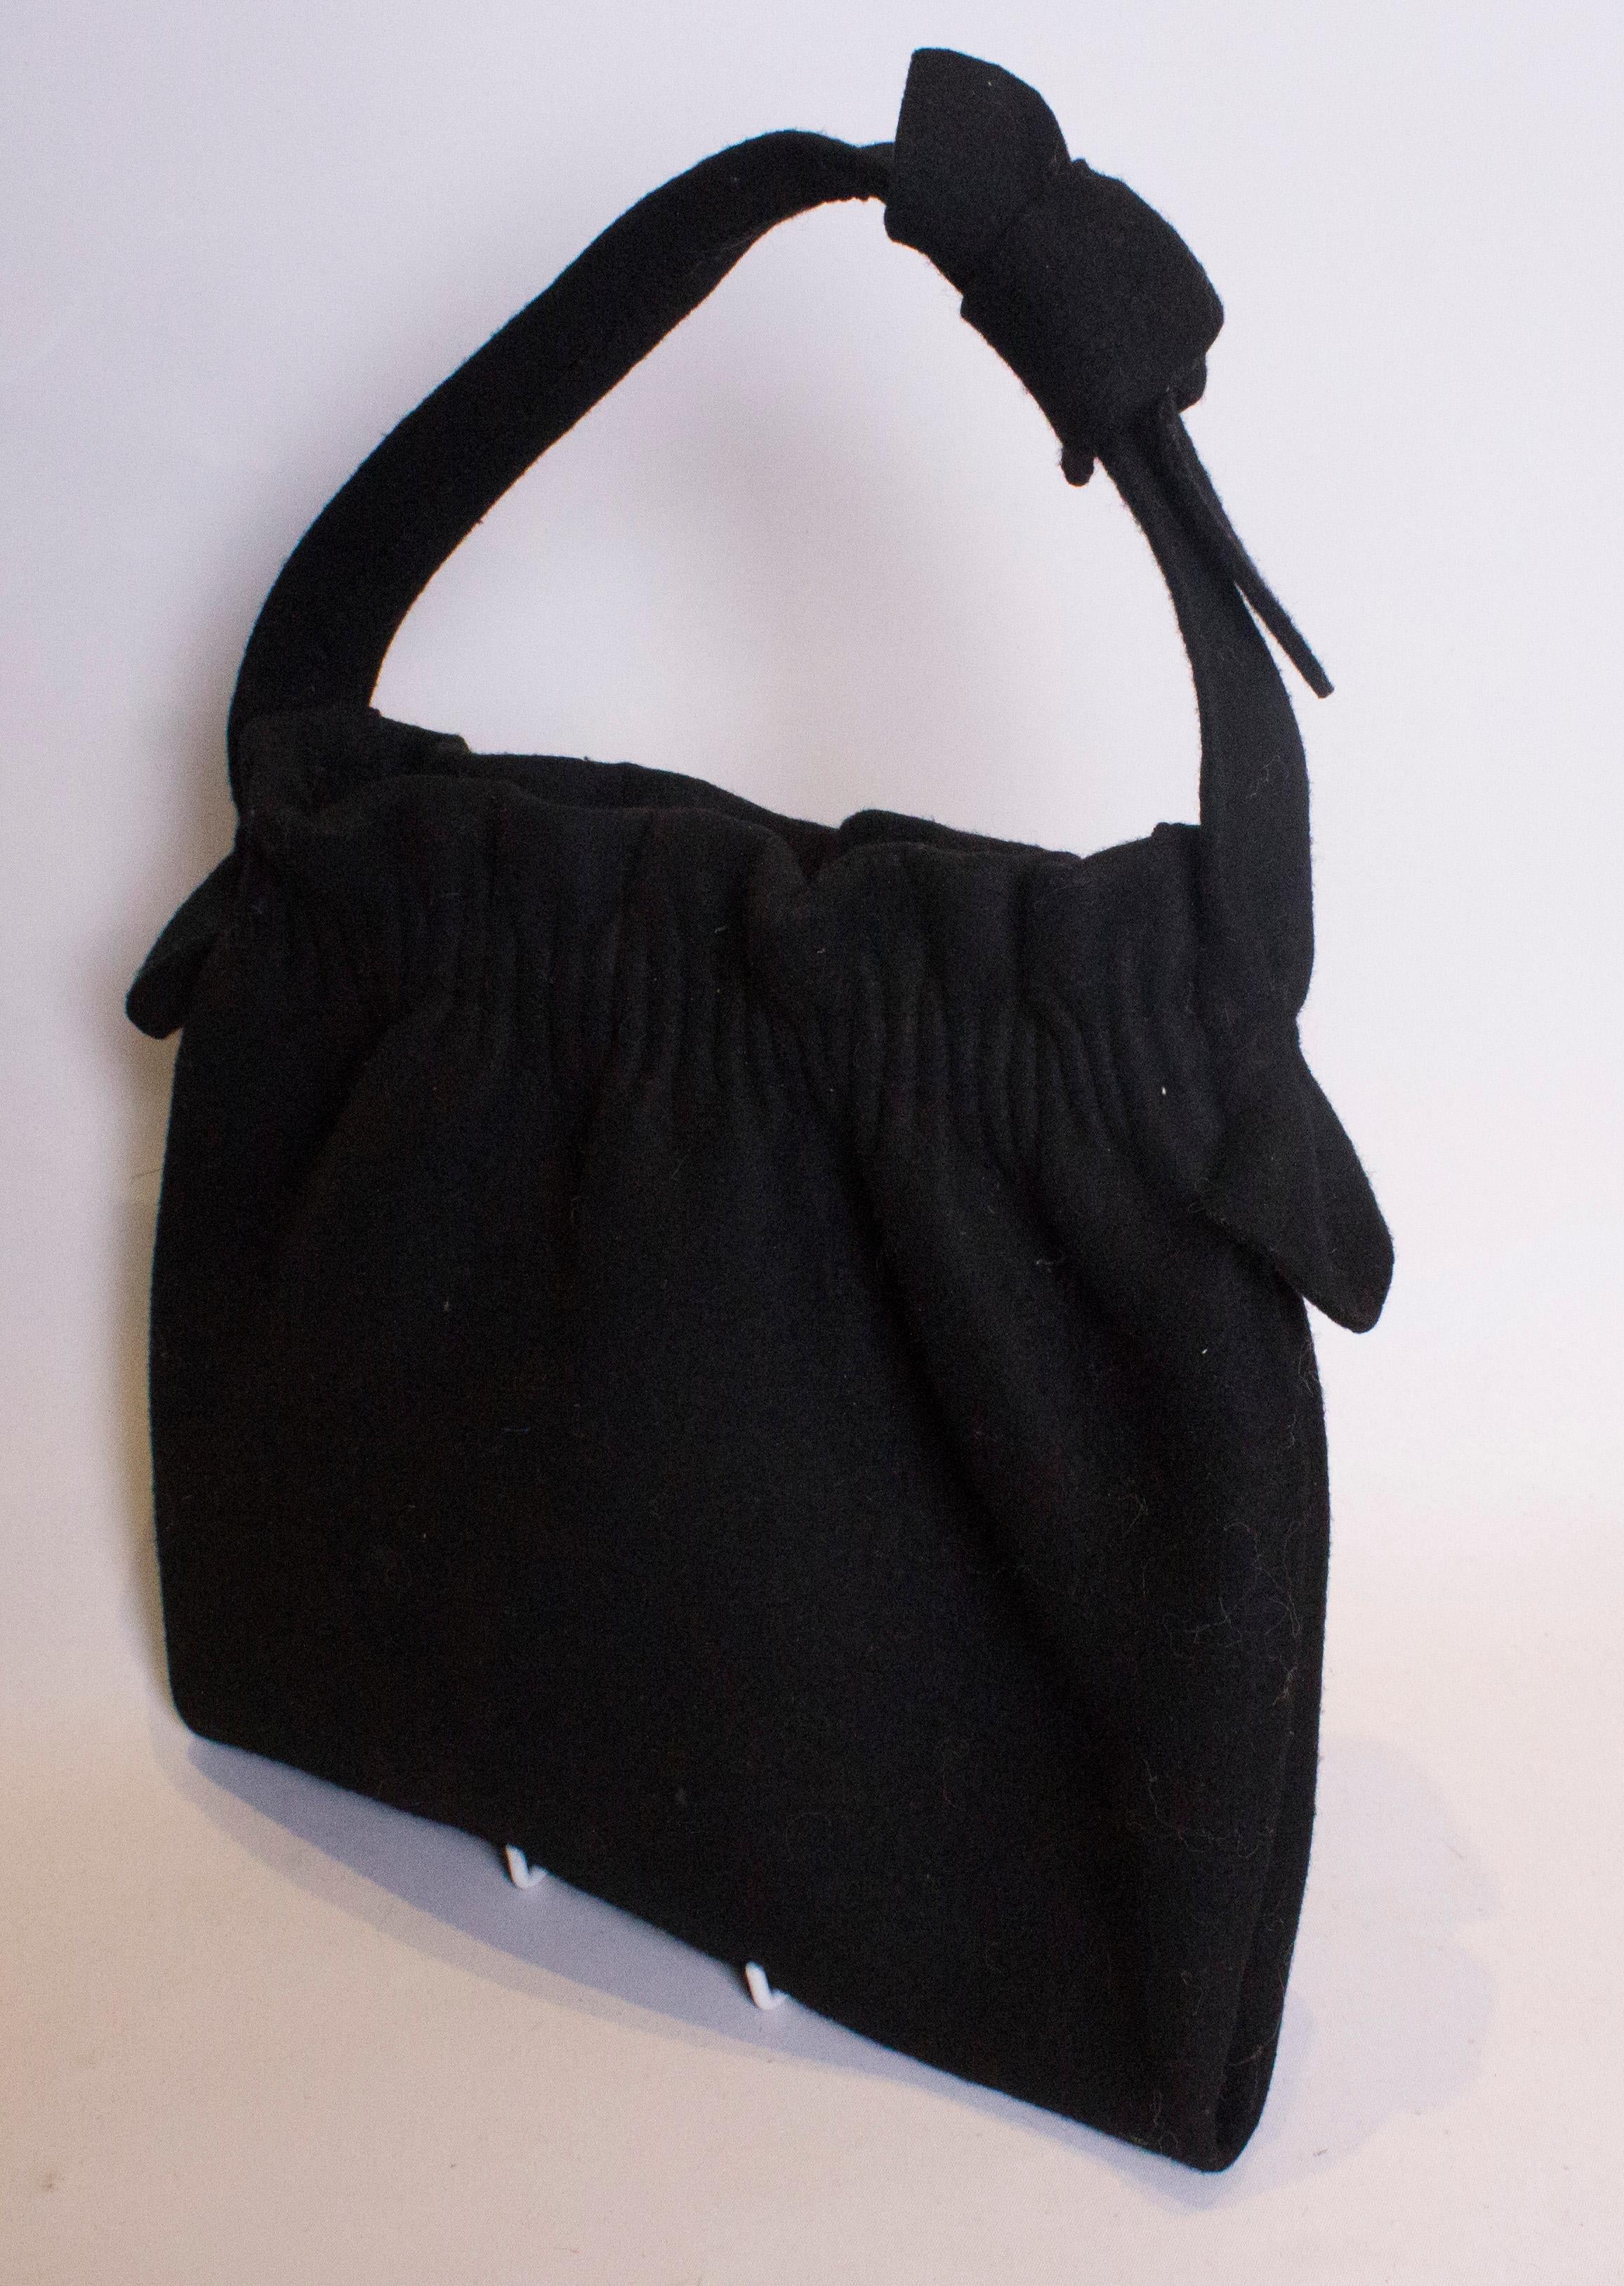 A cut vintage black felt bag that is large enough for todays essentials. The bag has gathering at the top, and is top handle.
Measurements: width 11  1/2'', height 11'' depth 1 1/2''